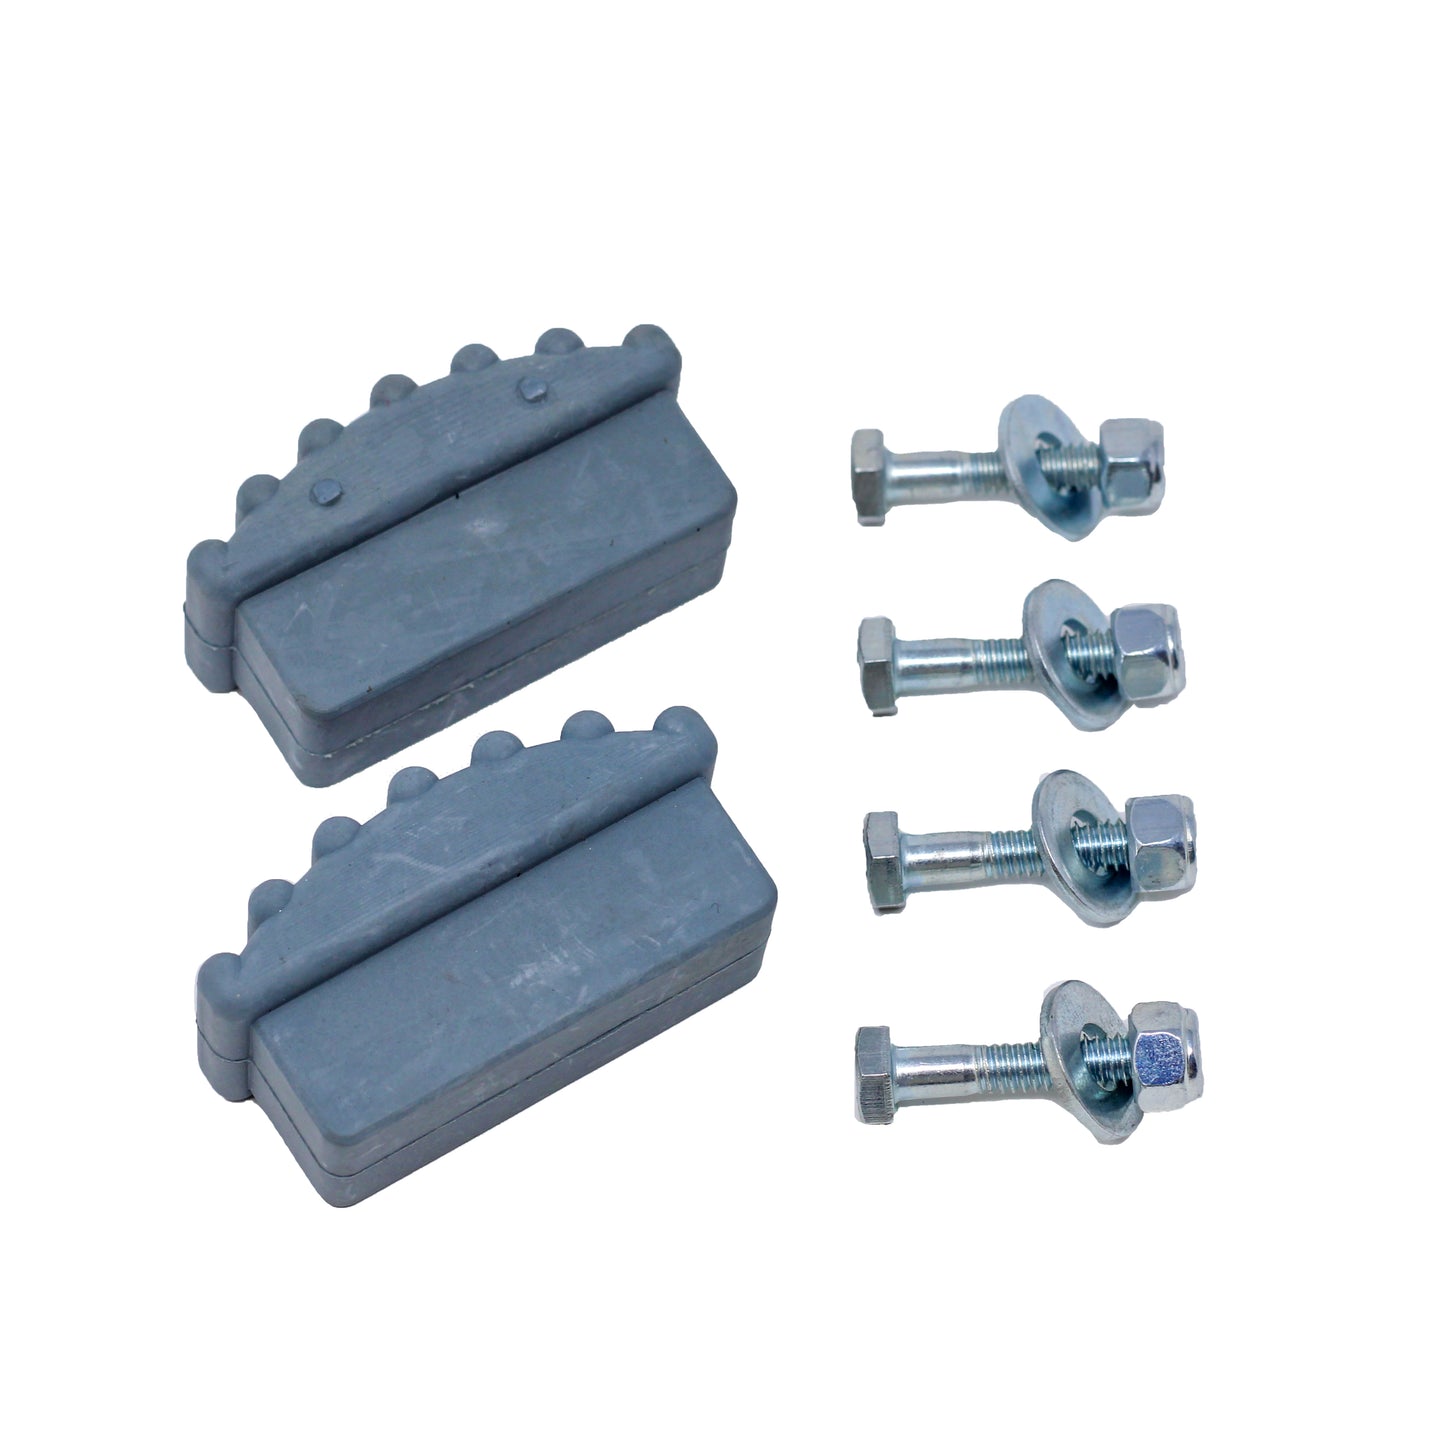 Replacement Rubber Ladder Plugs (Pair)